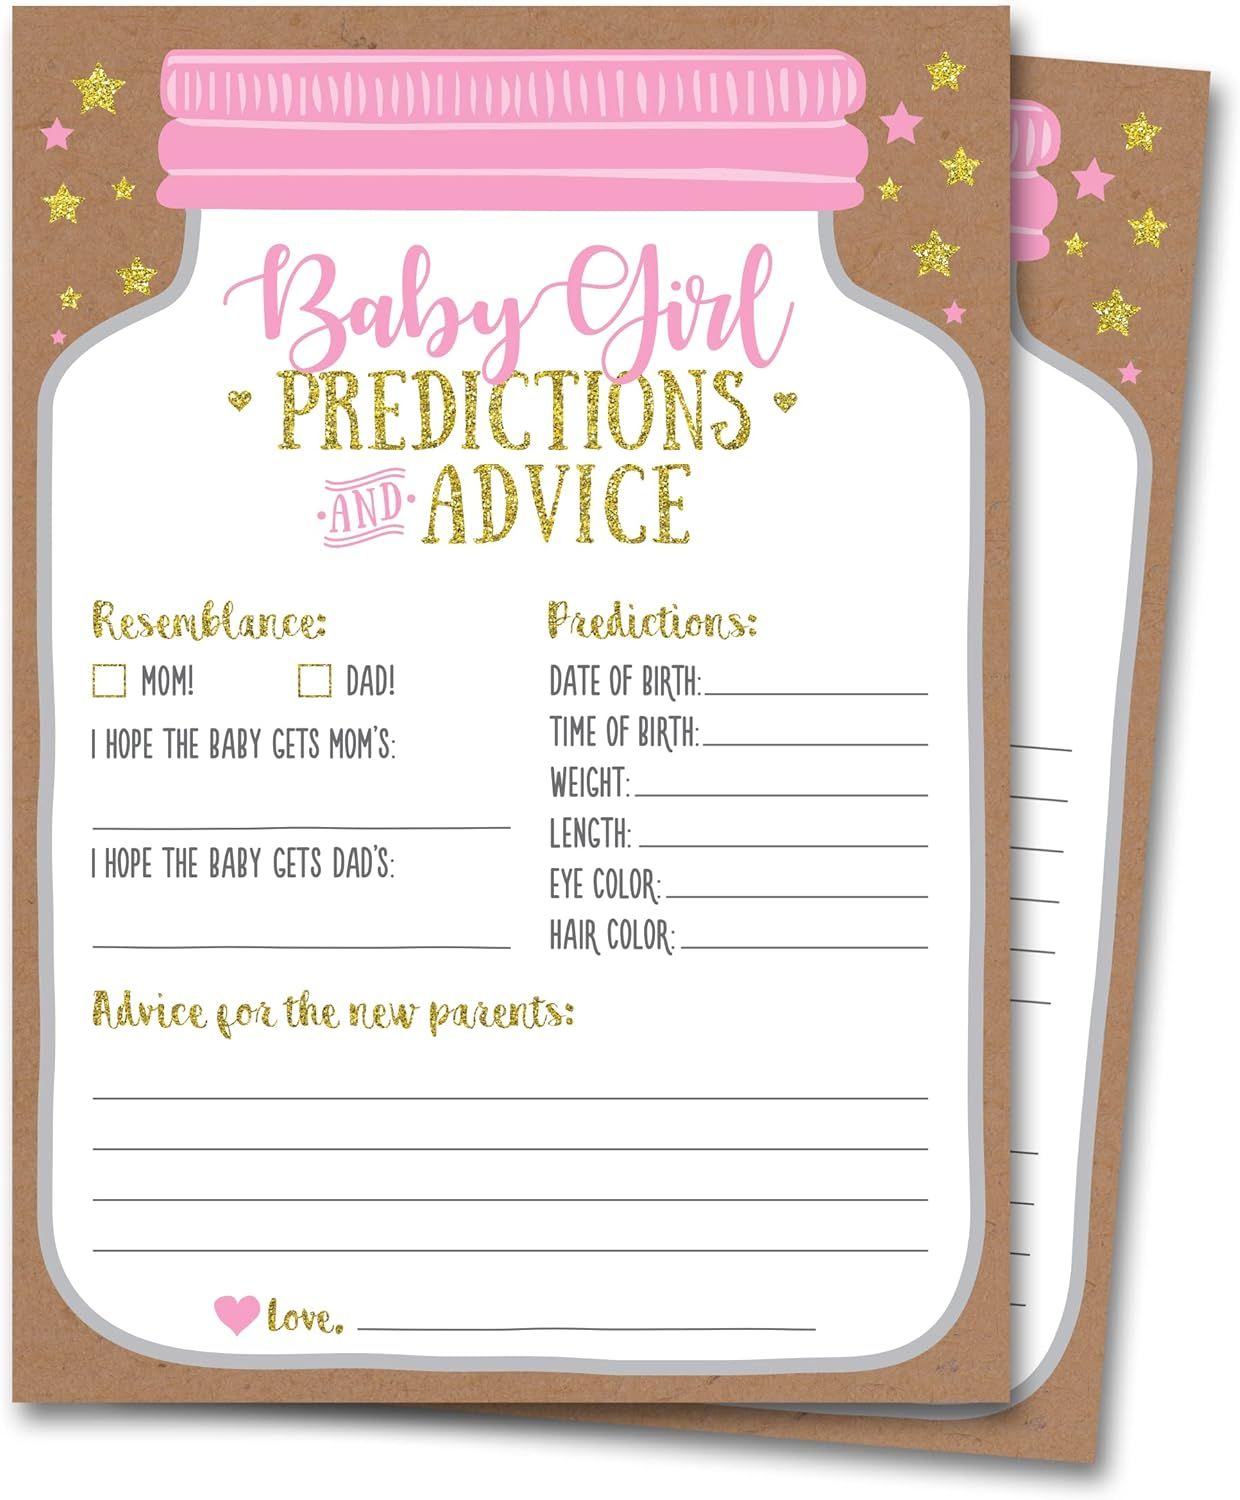 50 Baby Shower Predictions and Advice Cards For Baby Girl, Mason Jar Design - Baby Shower Games, ... | Amazon (US)